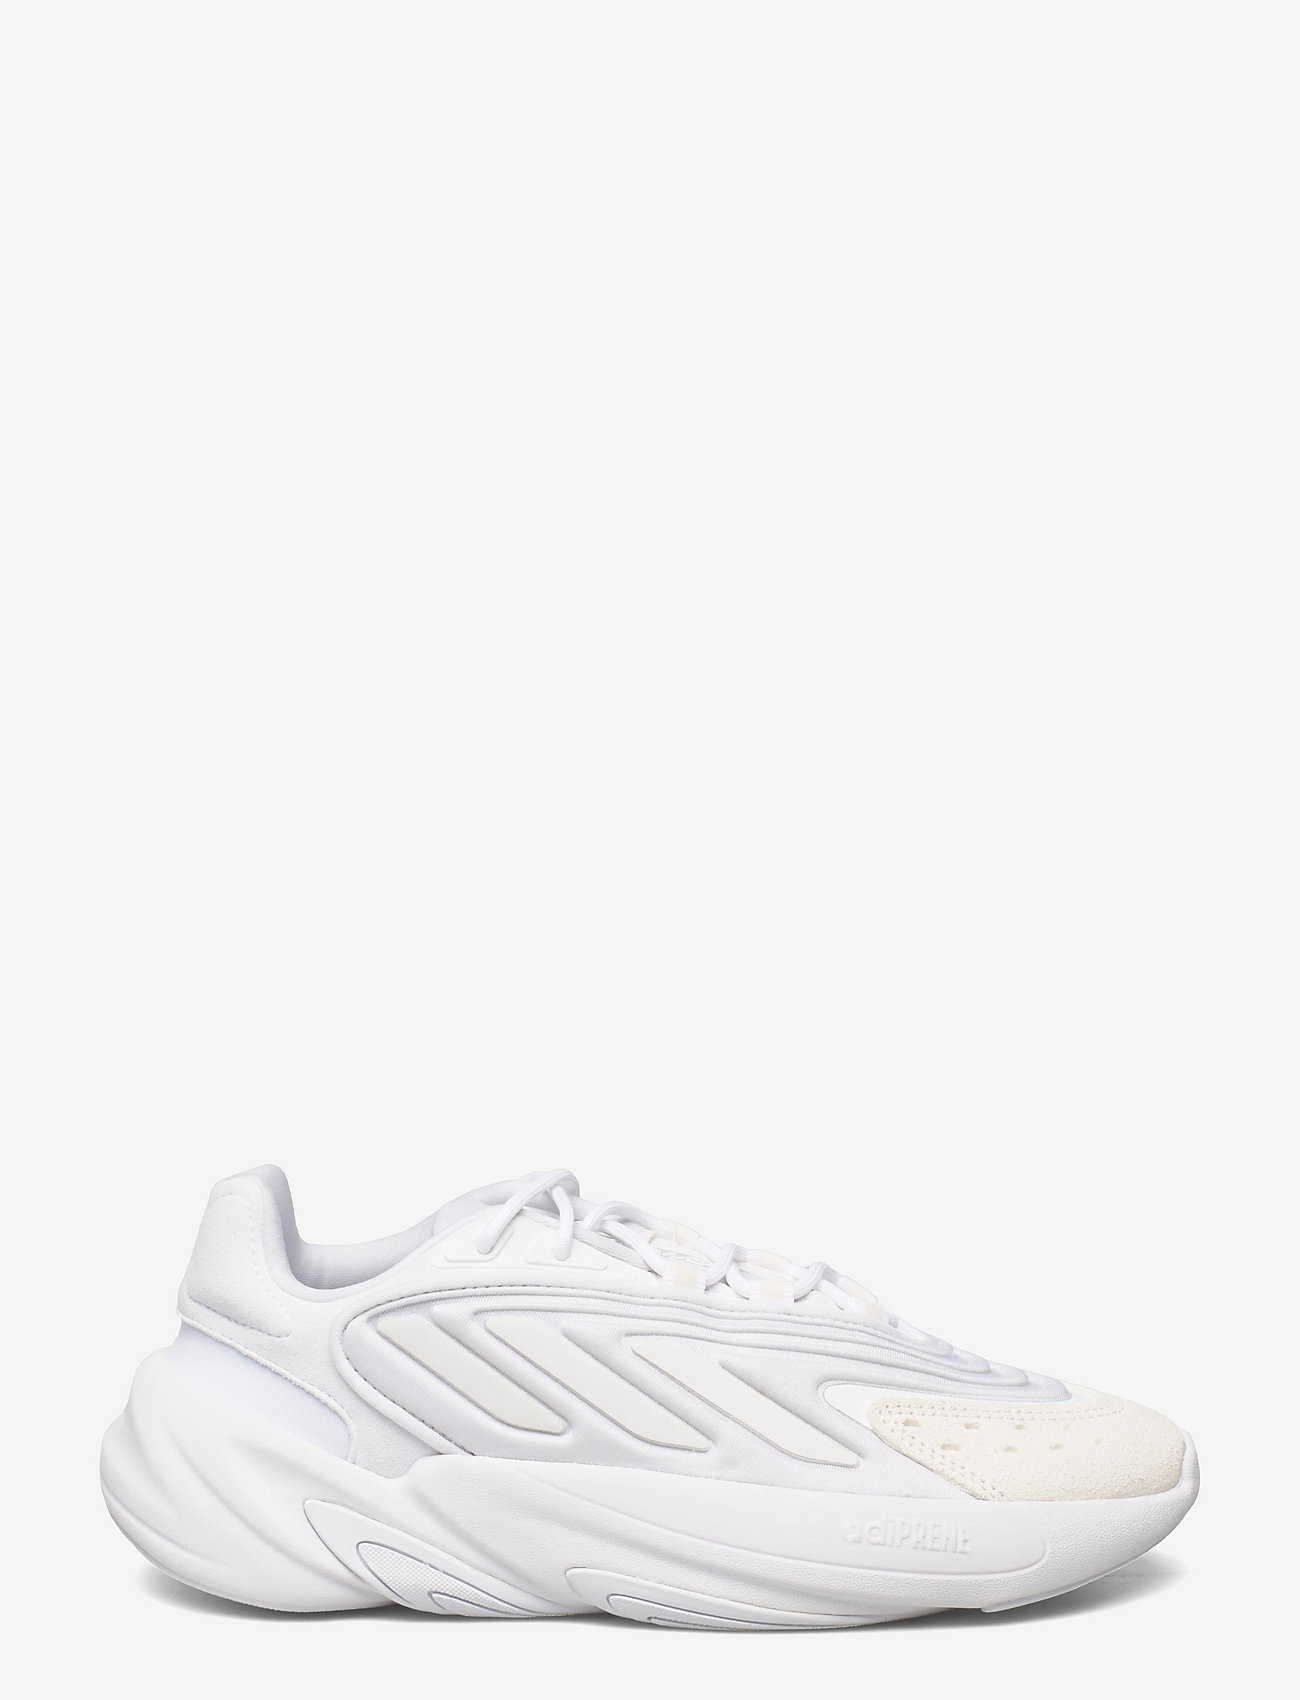 adidas Originals - Ozelia Shoes - chunky sneaker - ftwwht/ftwwht/crywht - 1